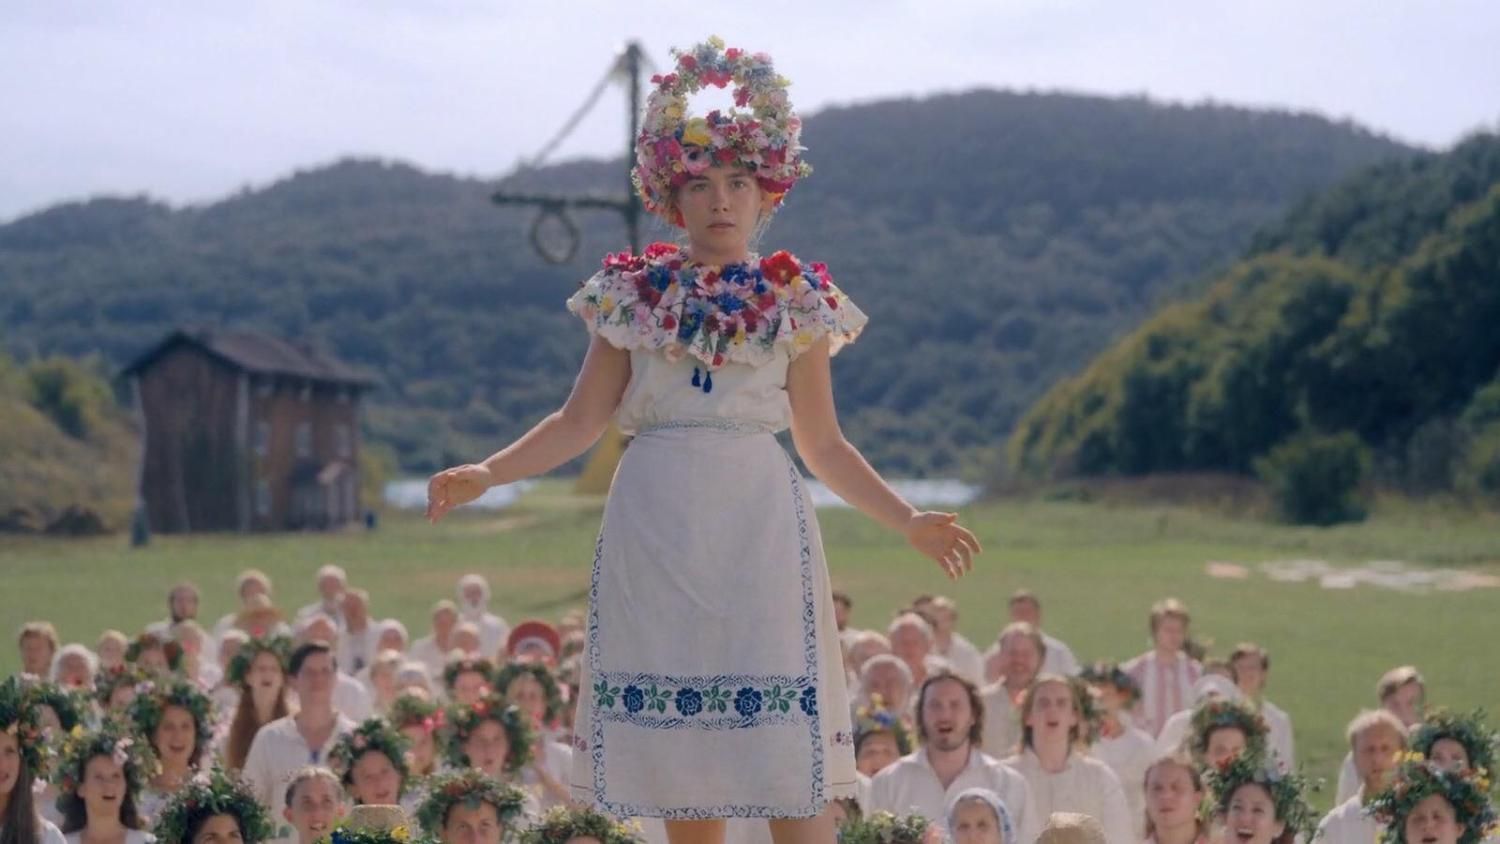 X 上的One Perfect Shot：「MIDSOMMAR (2019) Cinematography by Pawel Pogorzelski Directed by Ari Aster Read a deep dive into this film's ending: https://t.co/oZfDDzRcO4 https://t.co/WdV45Ni9Zz」 / X